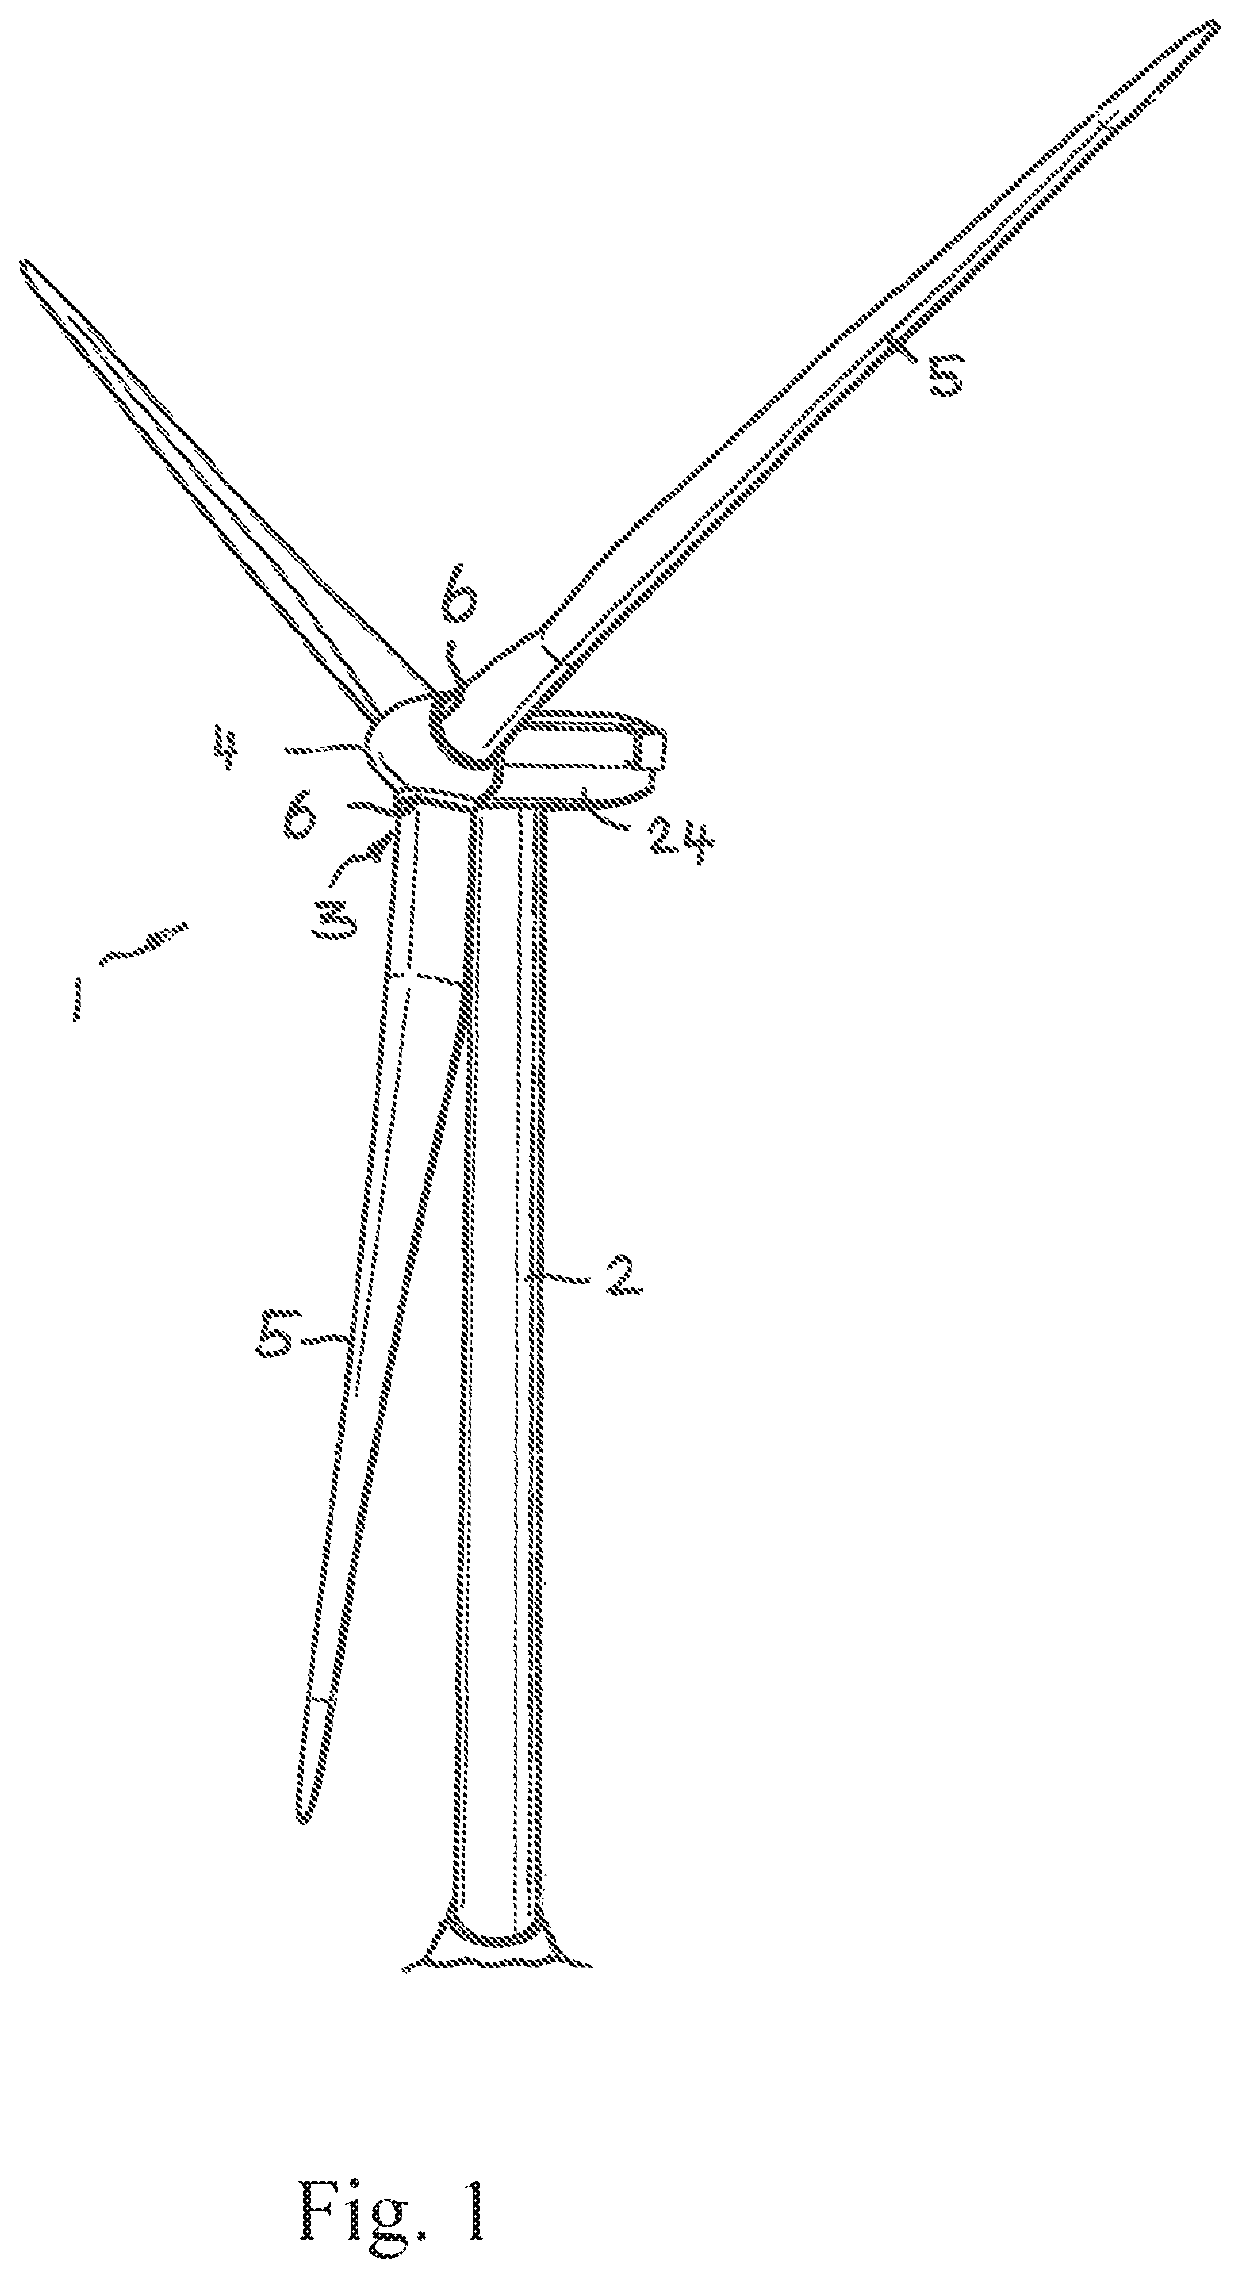 Adjustment unit for adjusting the pitch of a rotor blade, and wind turbine with such an adjustment unit